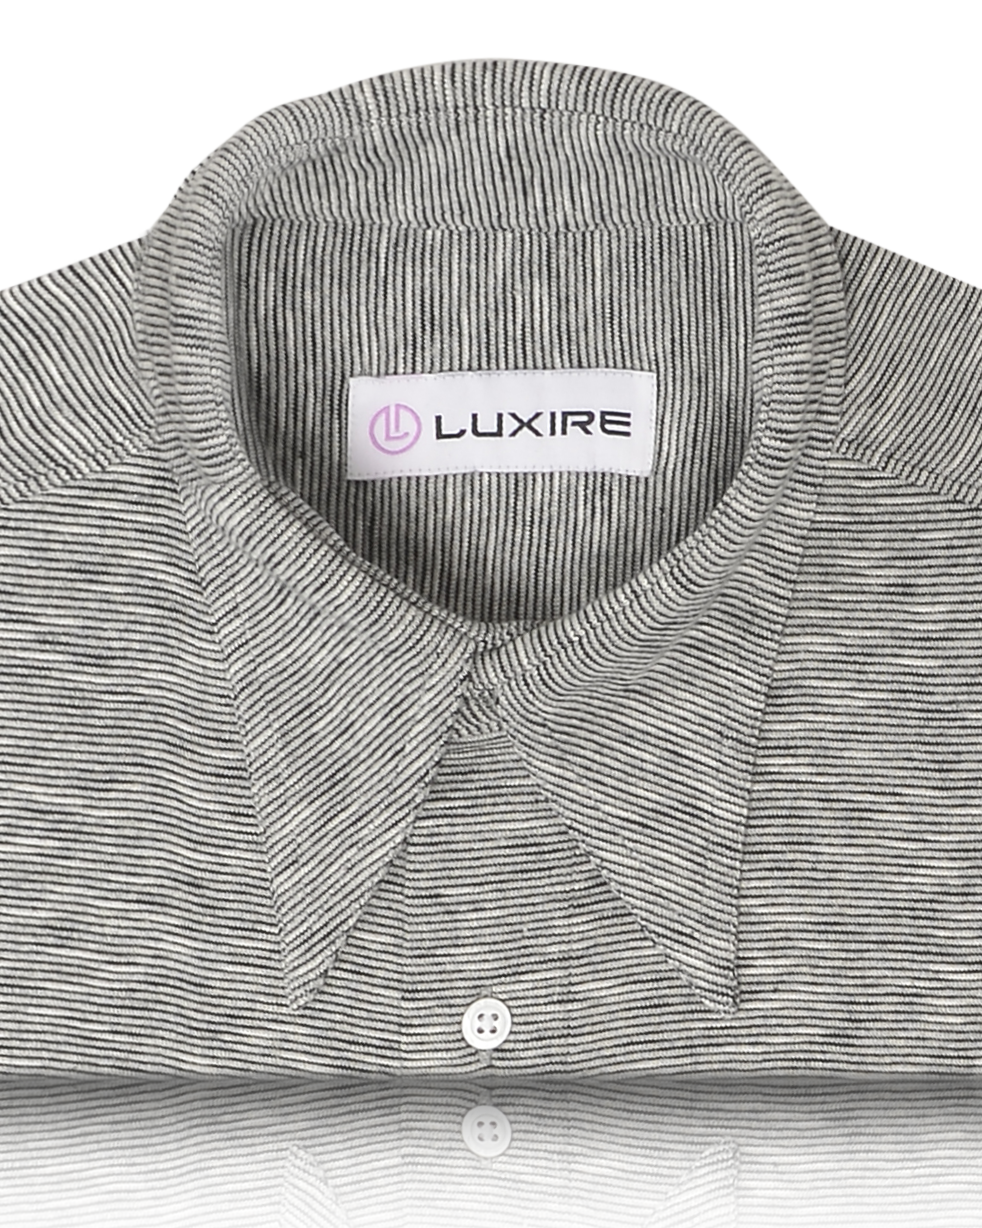 Collar of the custom oxford polo shirt for men by Luxire in black and white